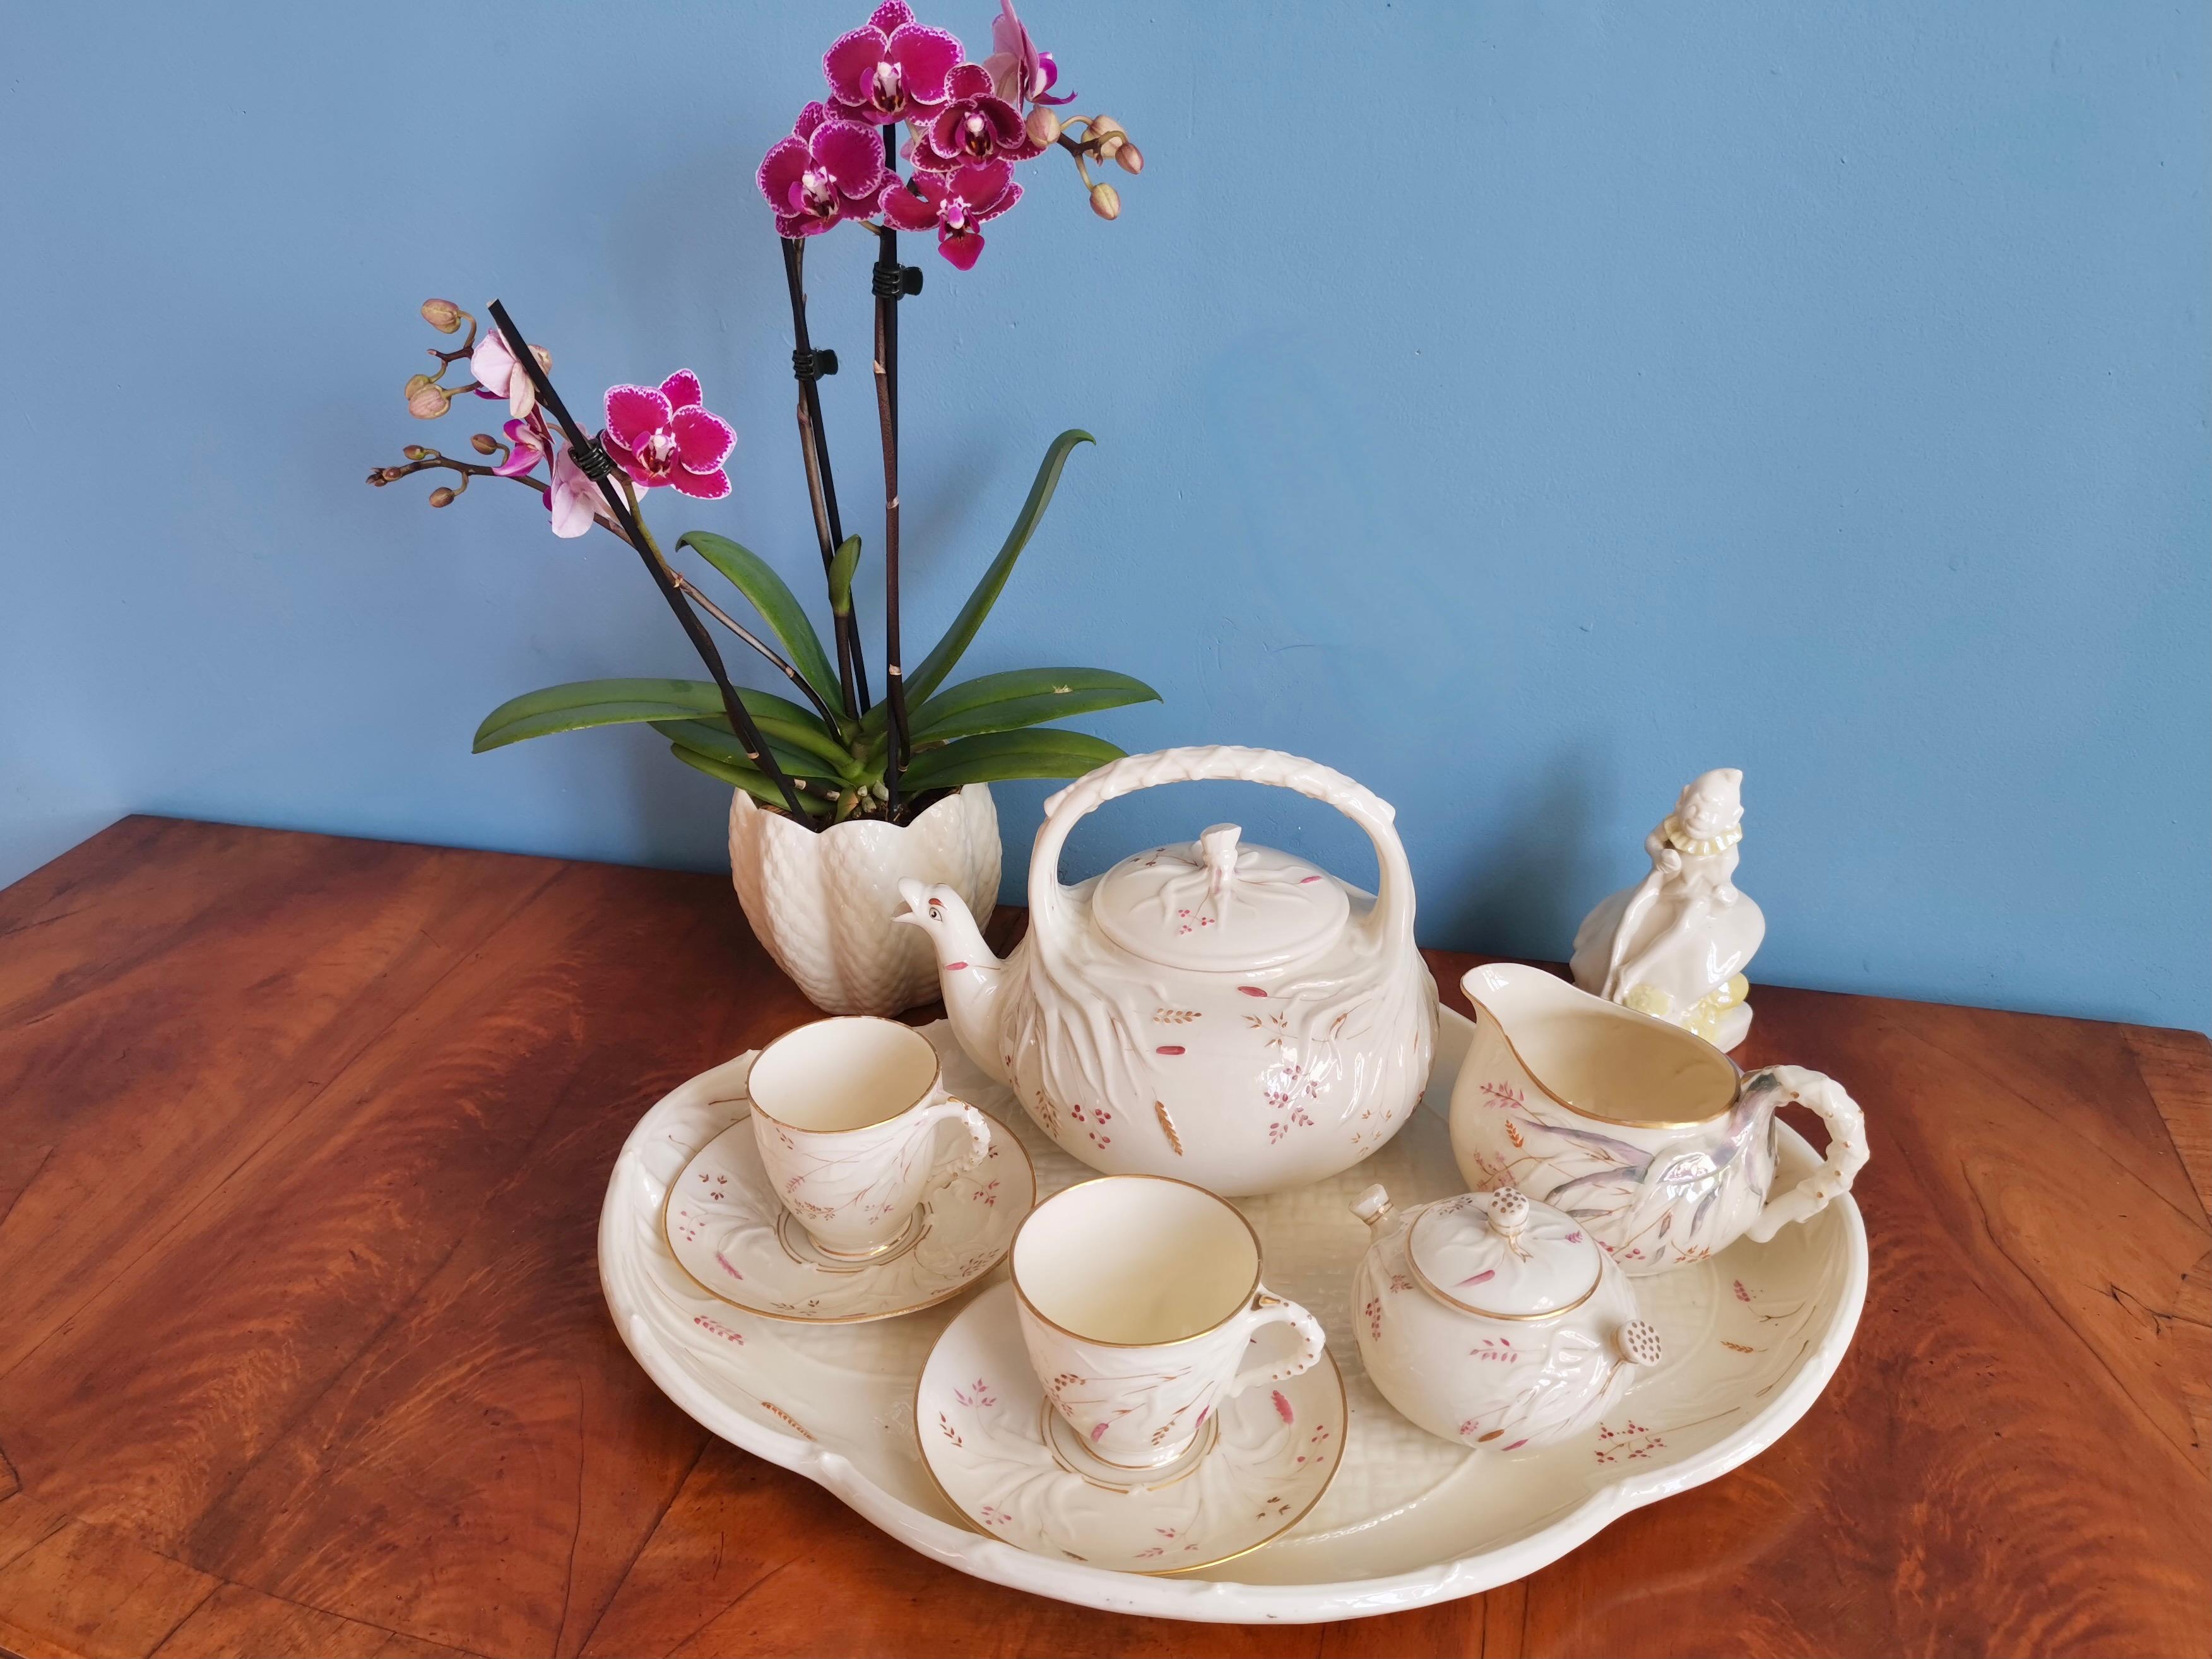 This is a beautiful and very rare Belleek cabaret set in the Grass design, consisting of a teapot, two teacups and saucers, a milk jug and a lidded sugar bowl, all placed on a large tray. All items carry the 1st Black Mark, which was used between